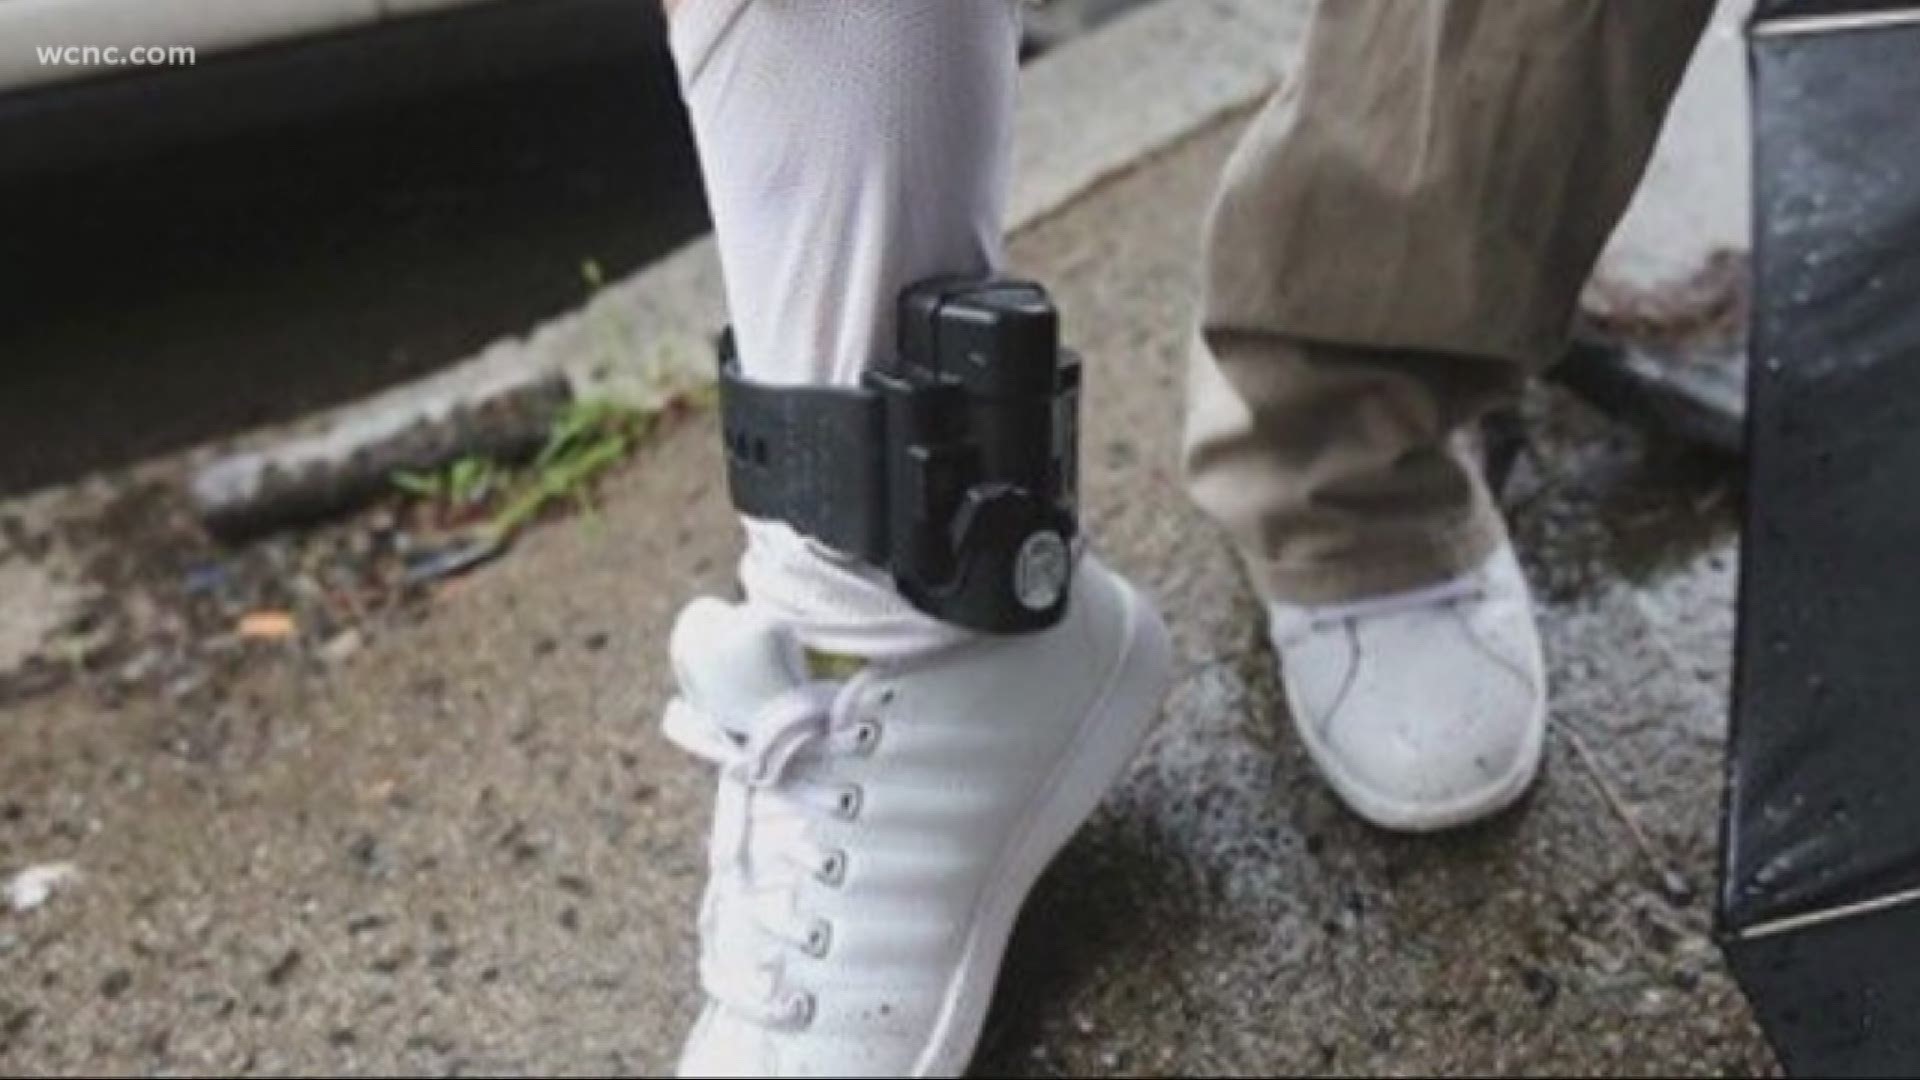 What Can You Not Do With an Ankle Monitor